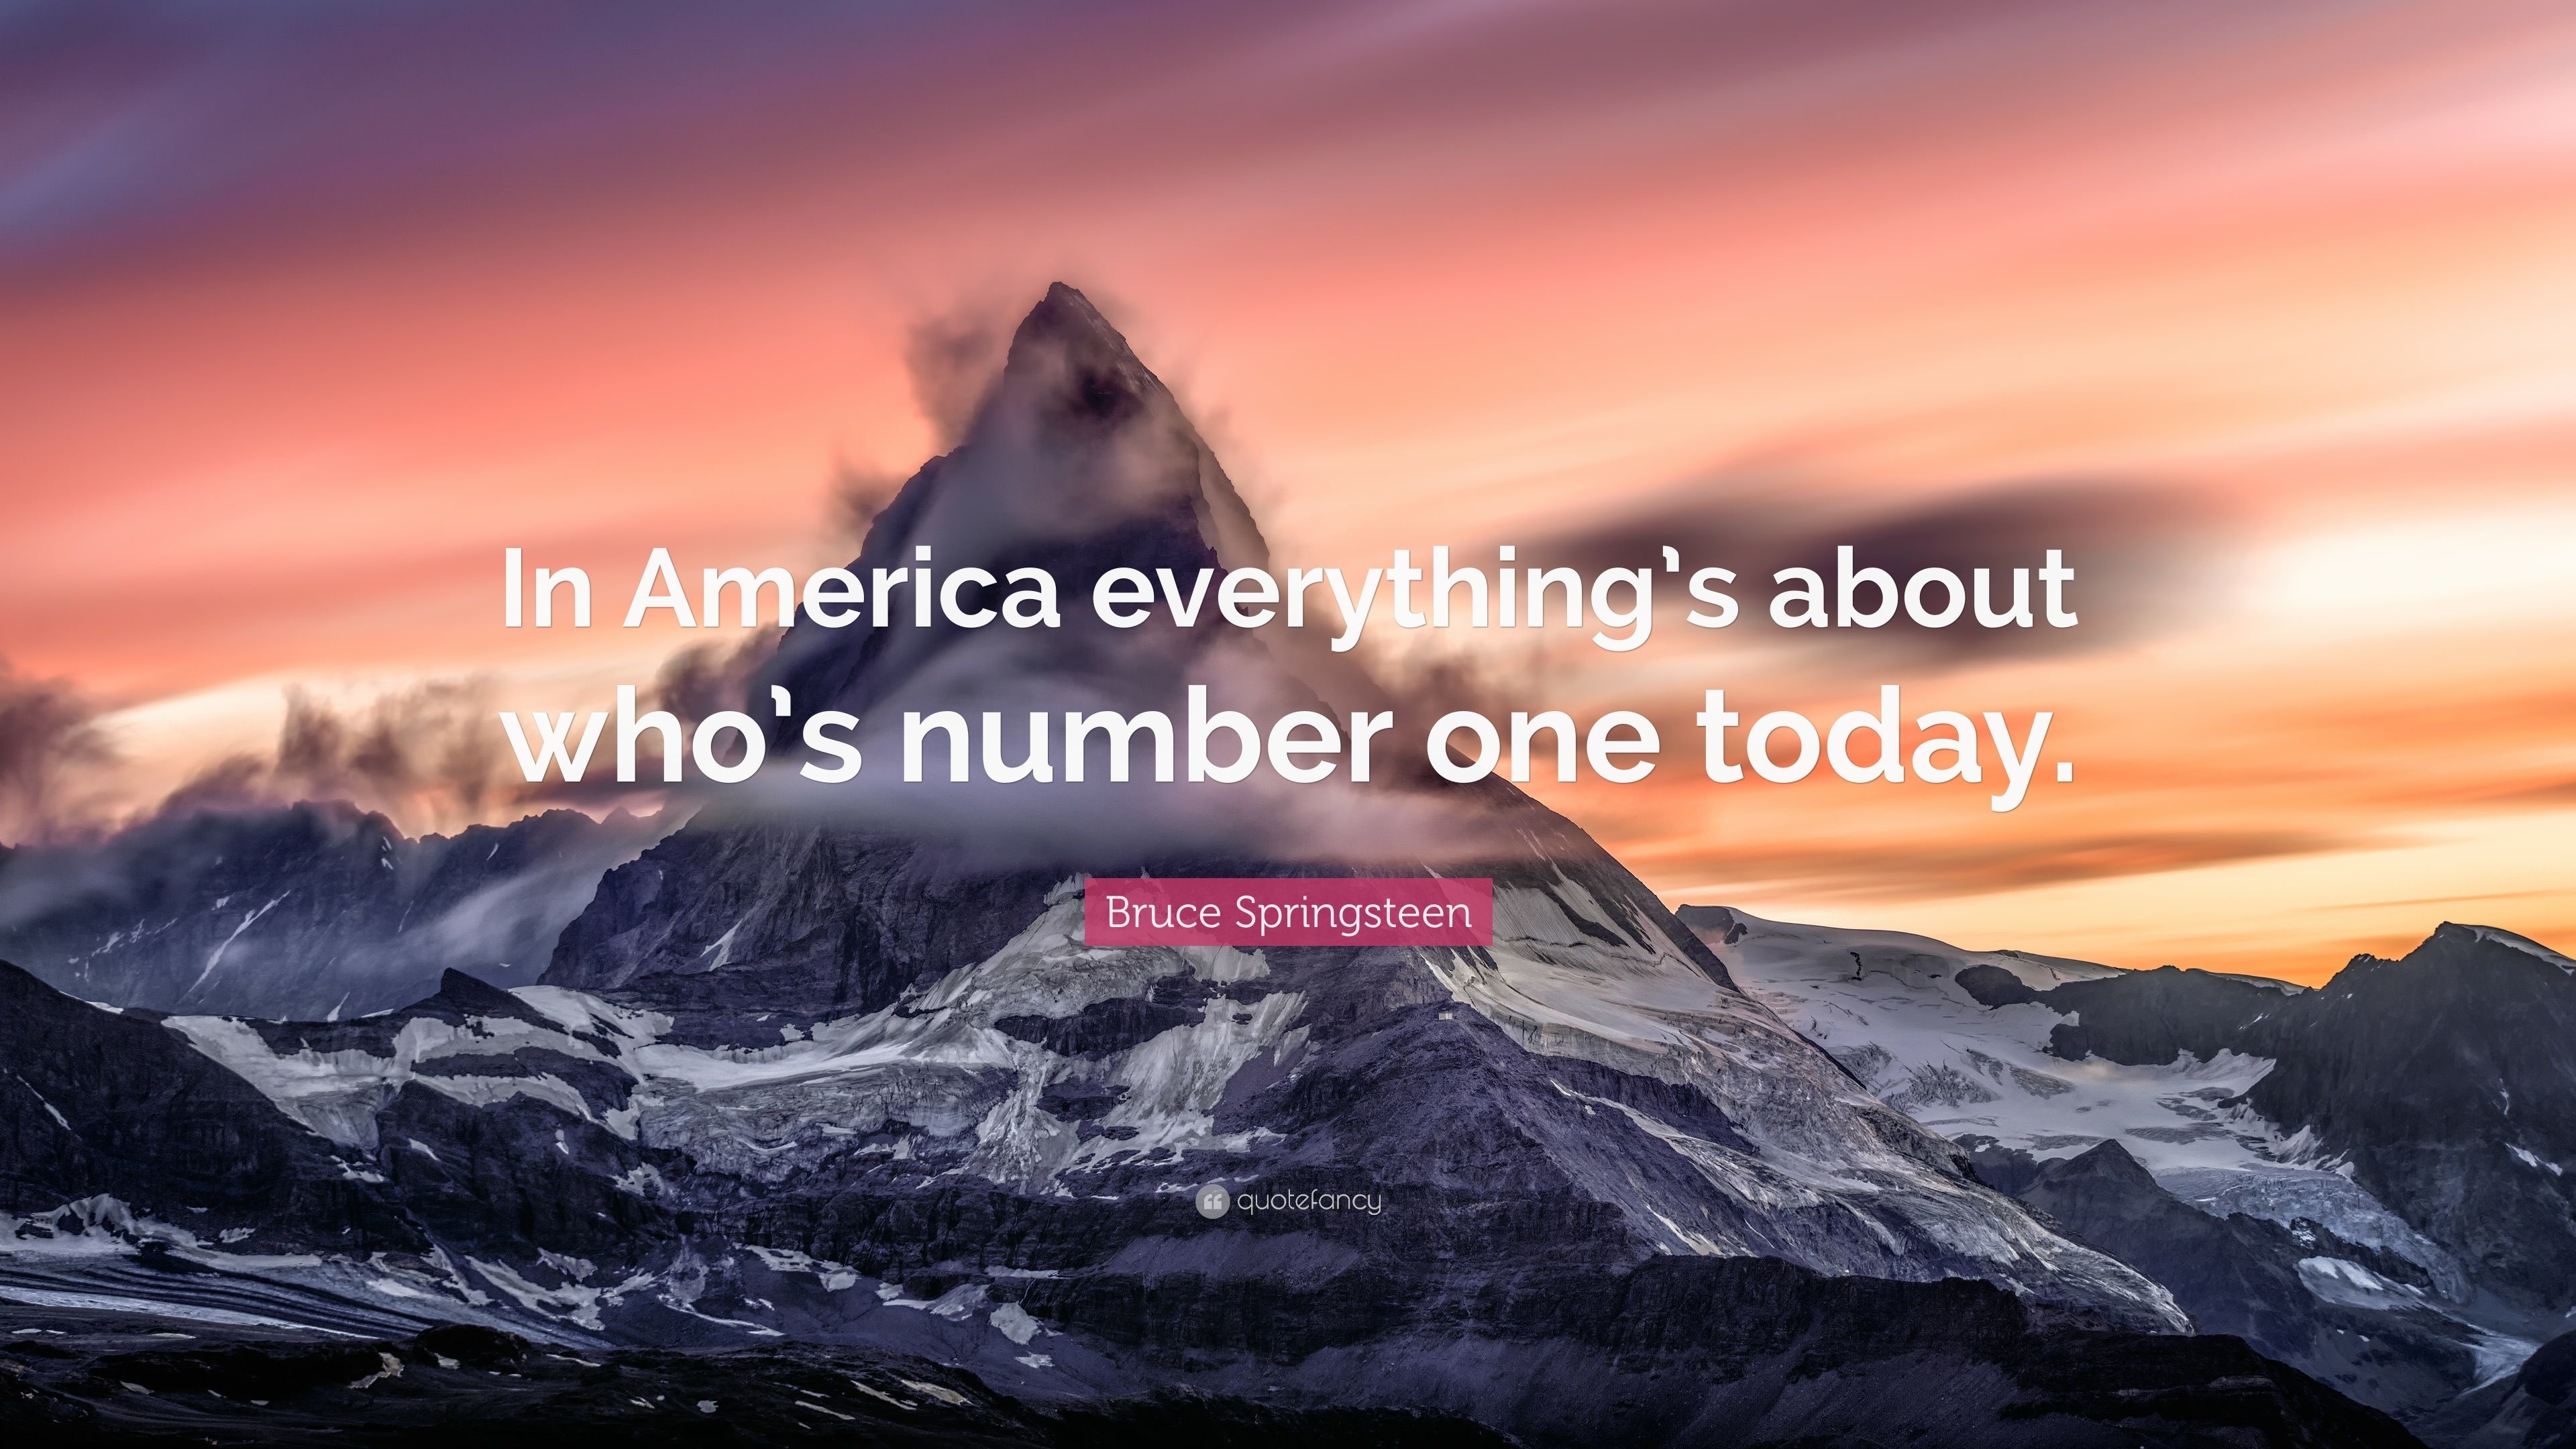 3840x2160 Bruce Springsteen Quote: “In America everything's about who's number one  today.”